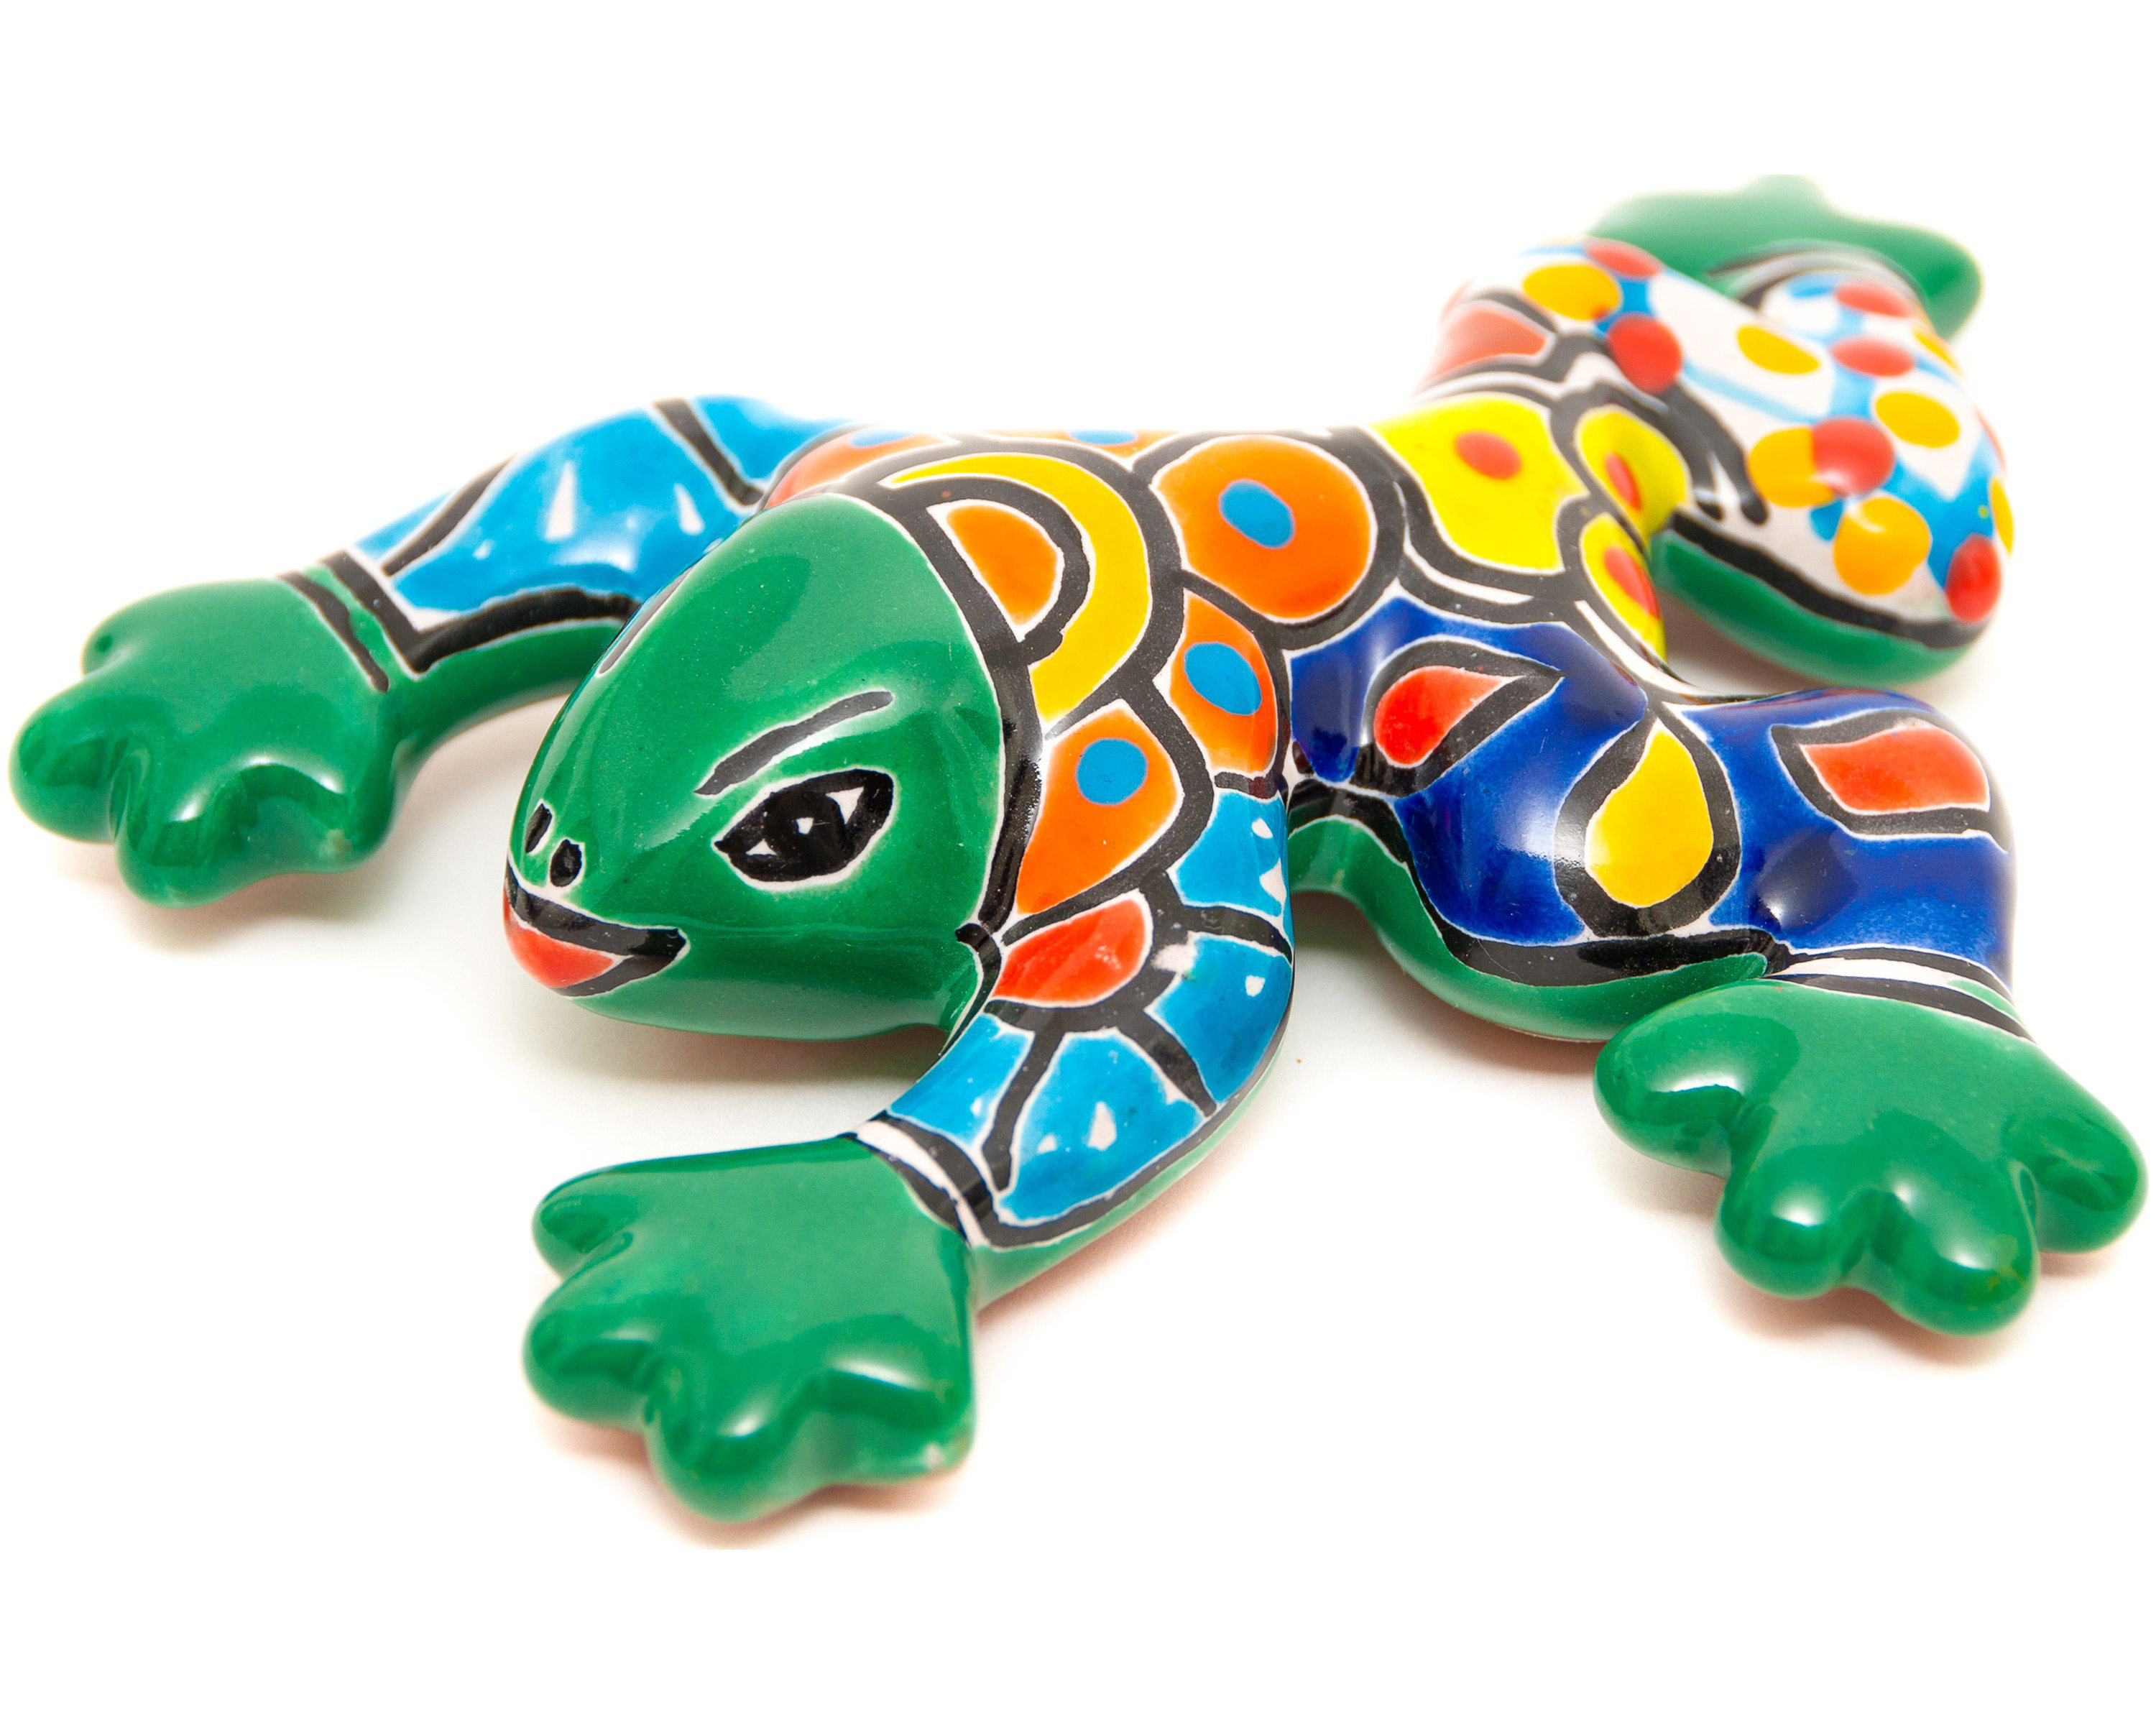 Talavera Frogs.small Talavera Frogs.mini Frogs.frog Collection.frog  Figurines.frog Decor.small Frogs.frog Art.frog Lover.frog 